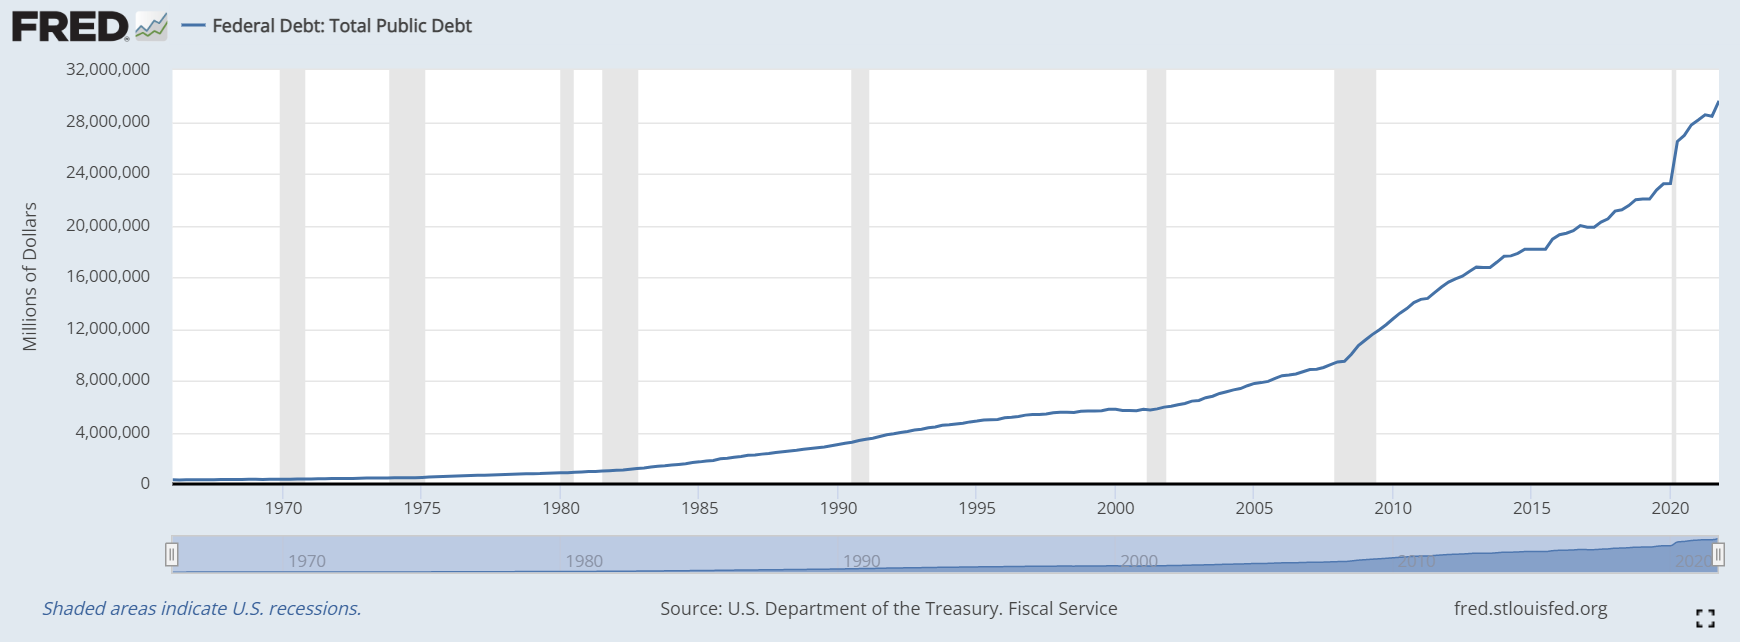 Meanwhile, the US Debt has grown to nearly $30 Trillion